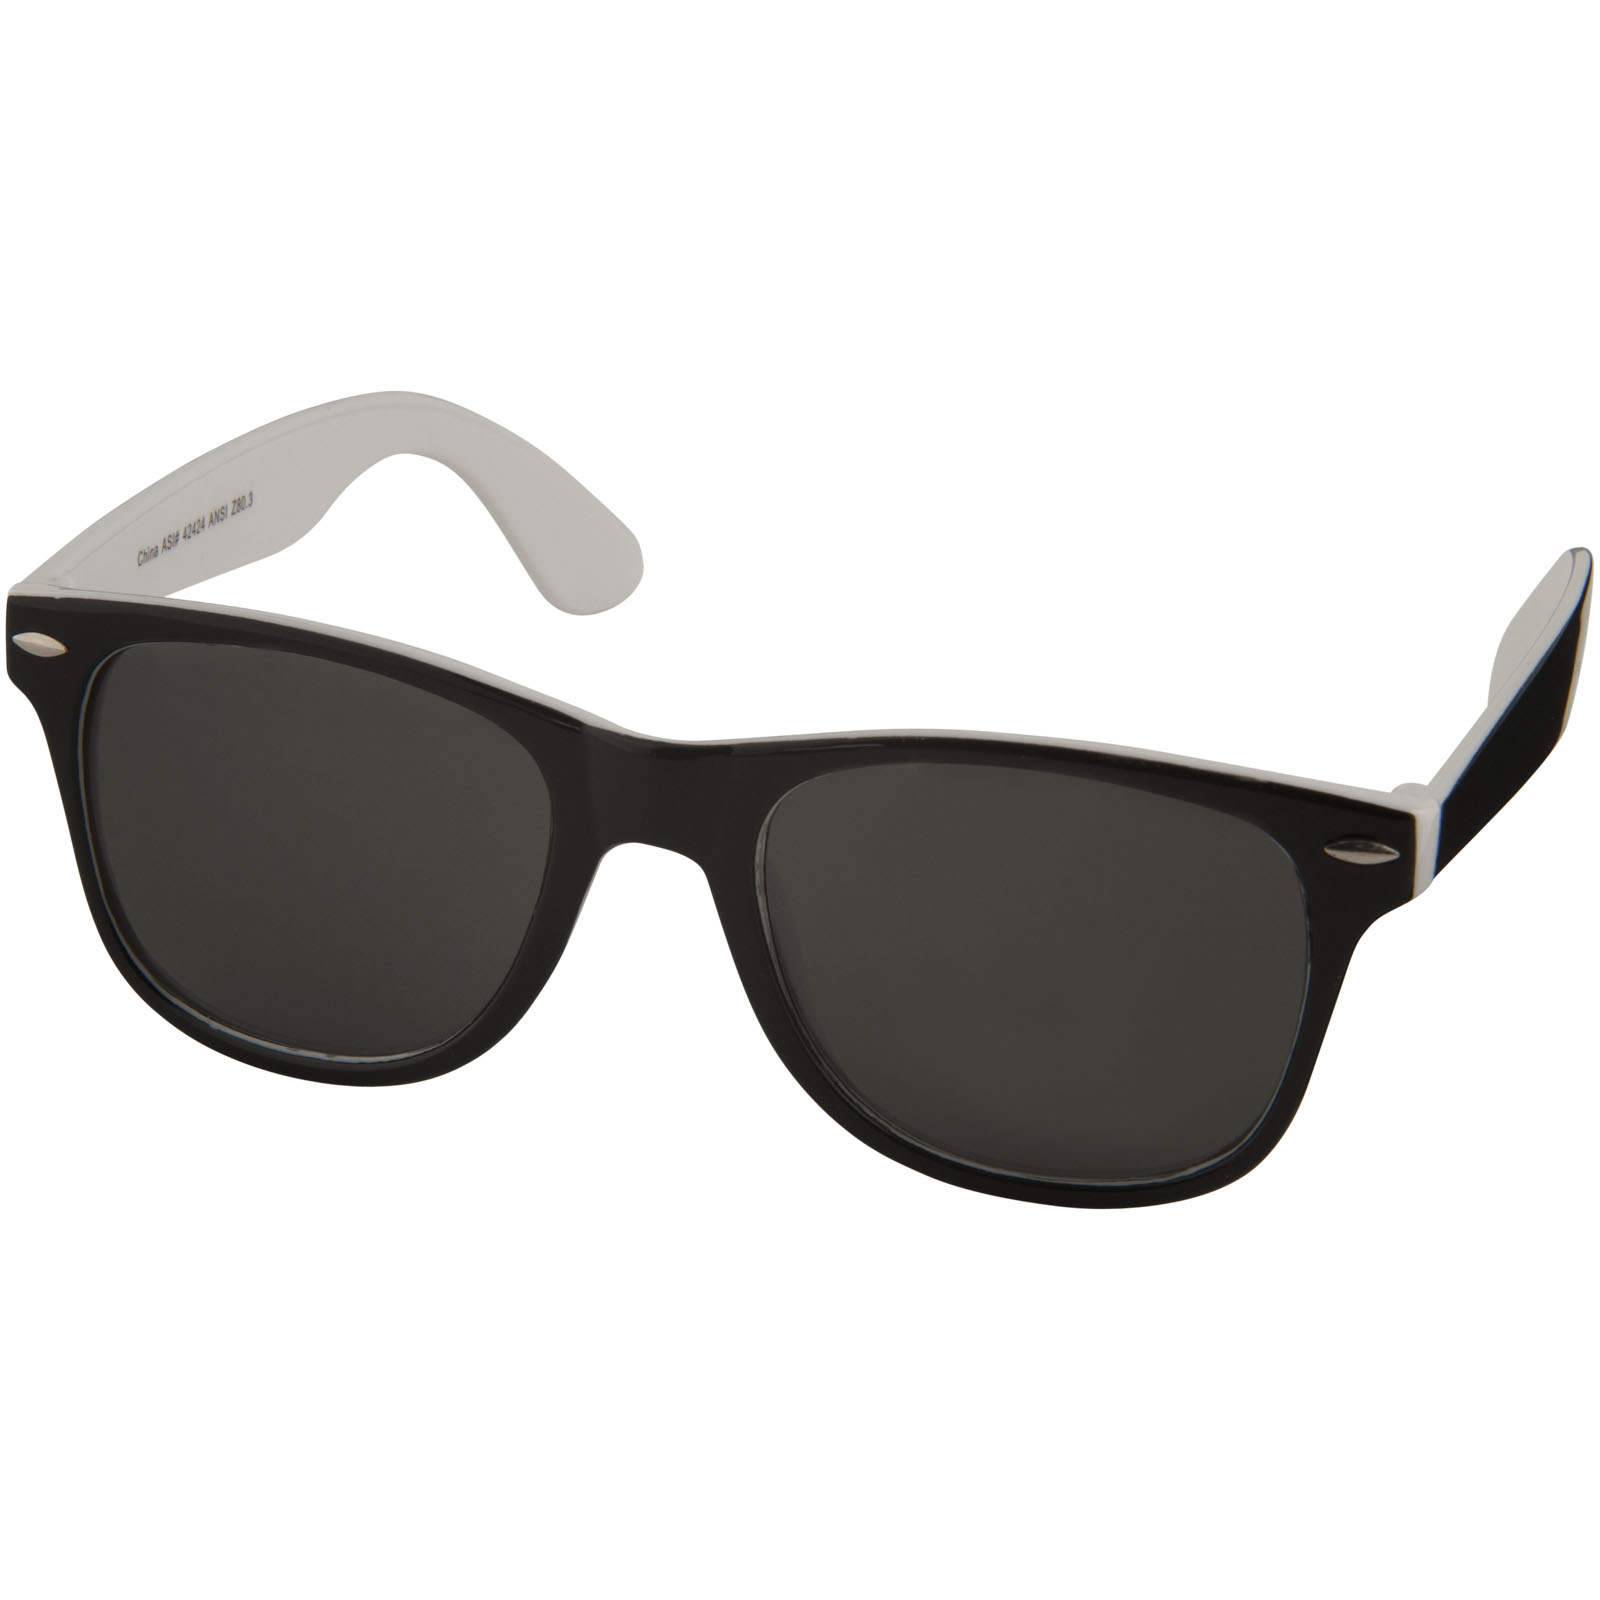 Advertising Sunglasses - Sun Ray sunglasses with two coloured tones - 0